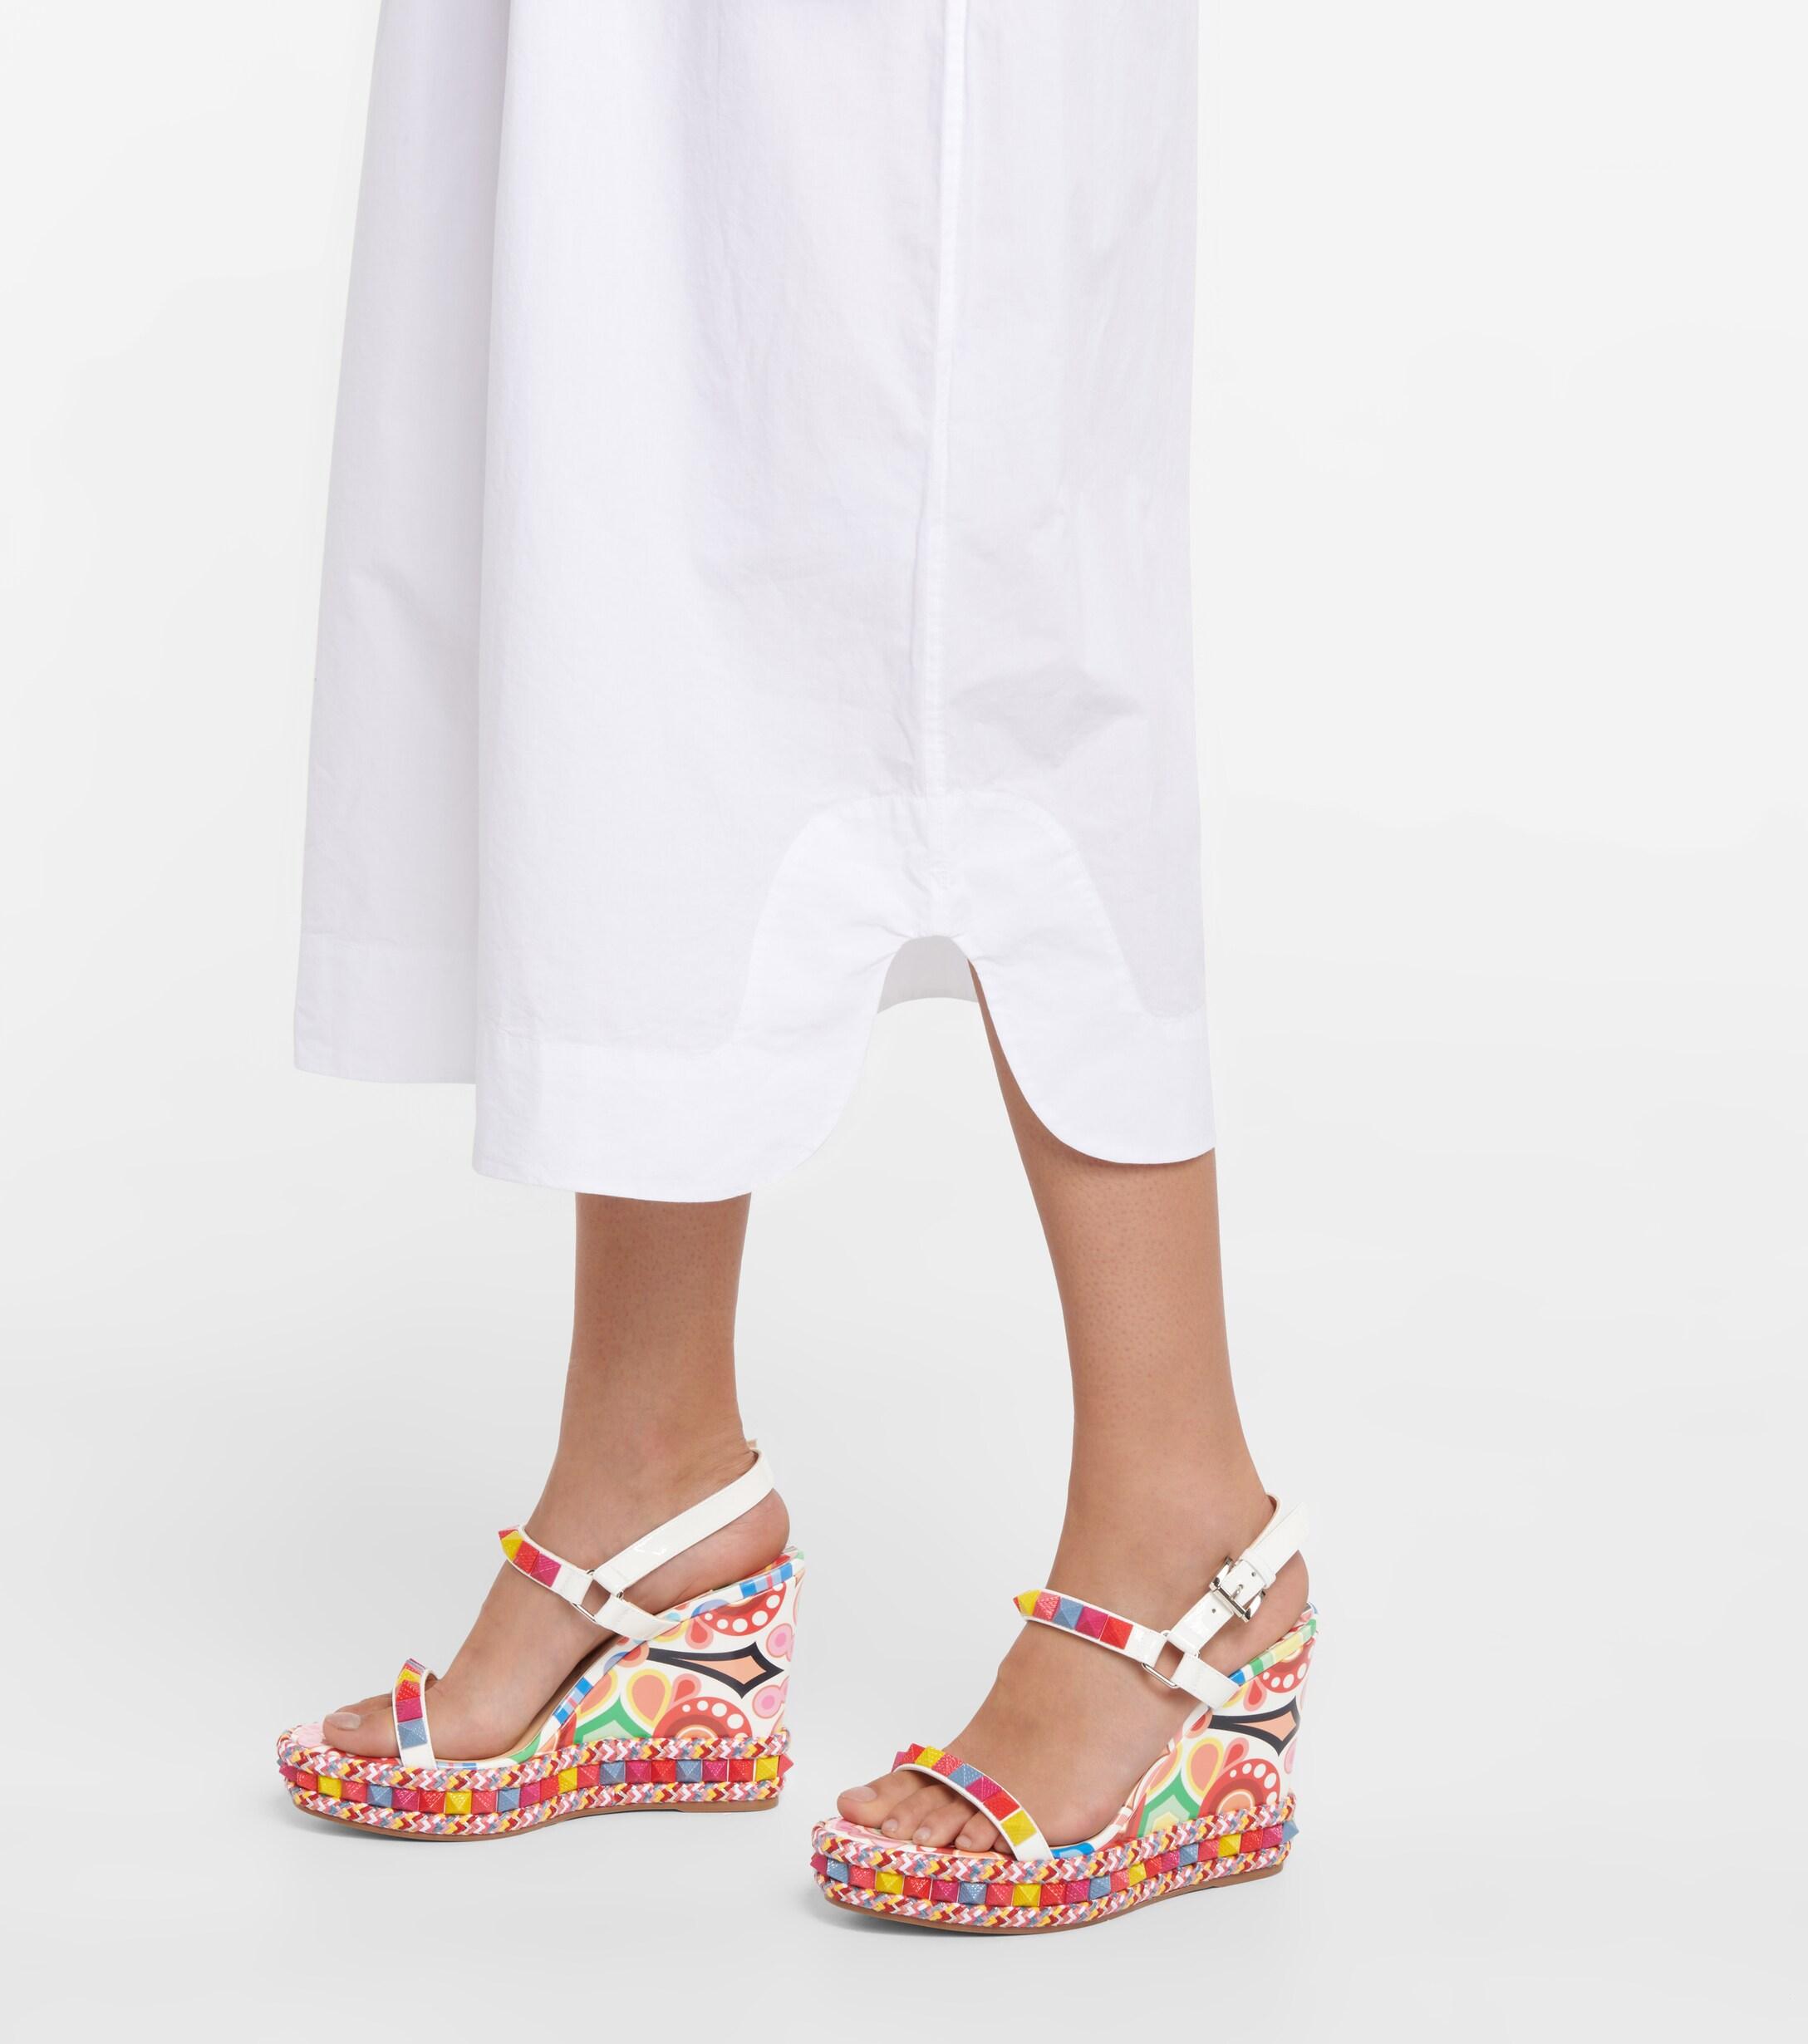 Christian Louboutin Pyraclou 110 Embellished Wedge Sandals | Lyst